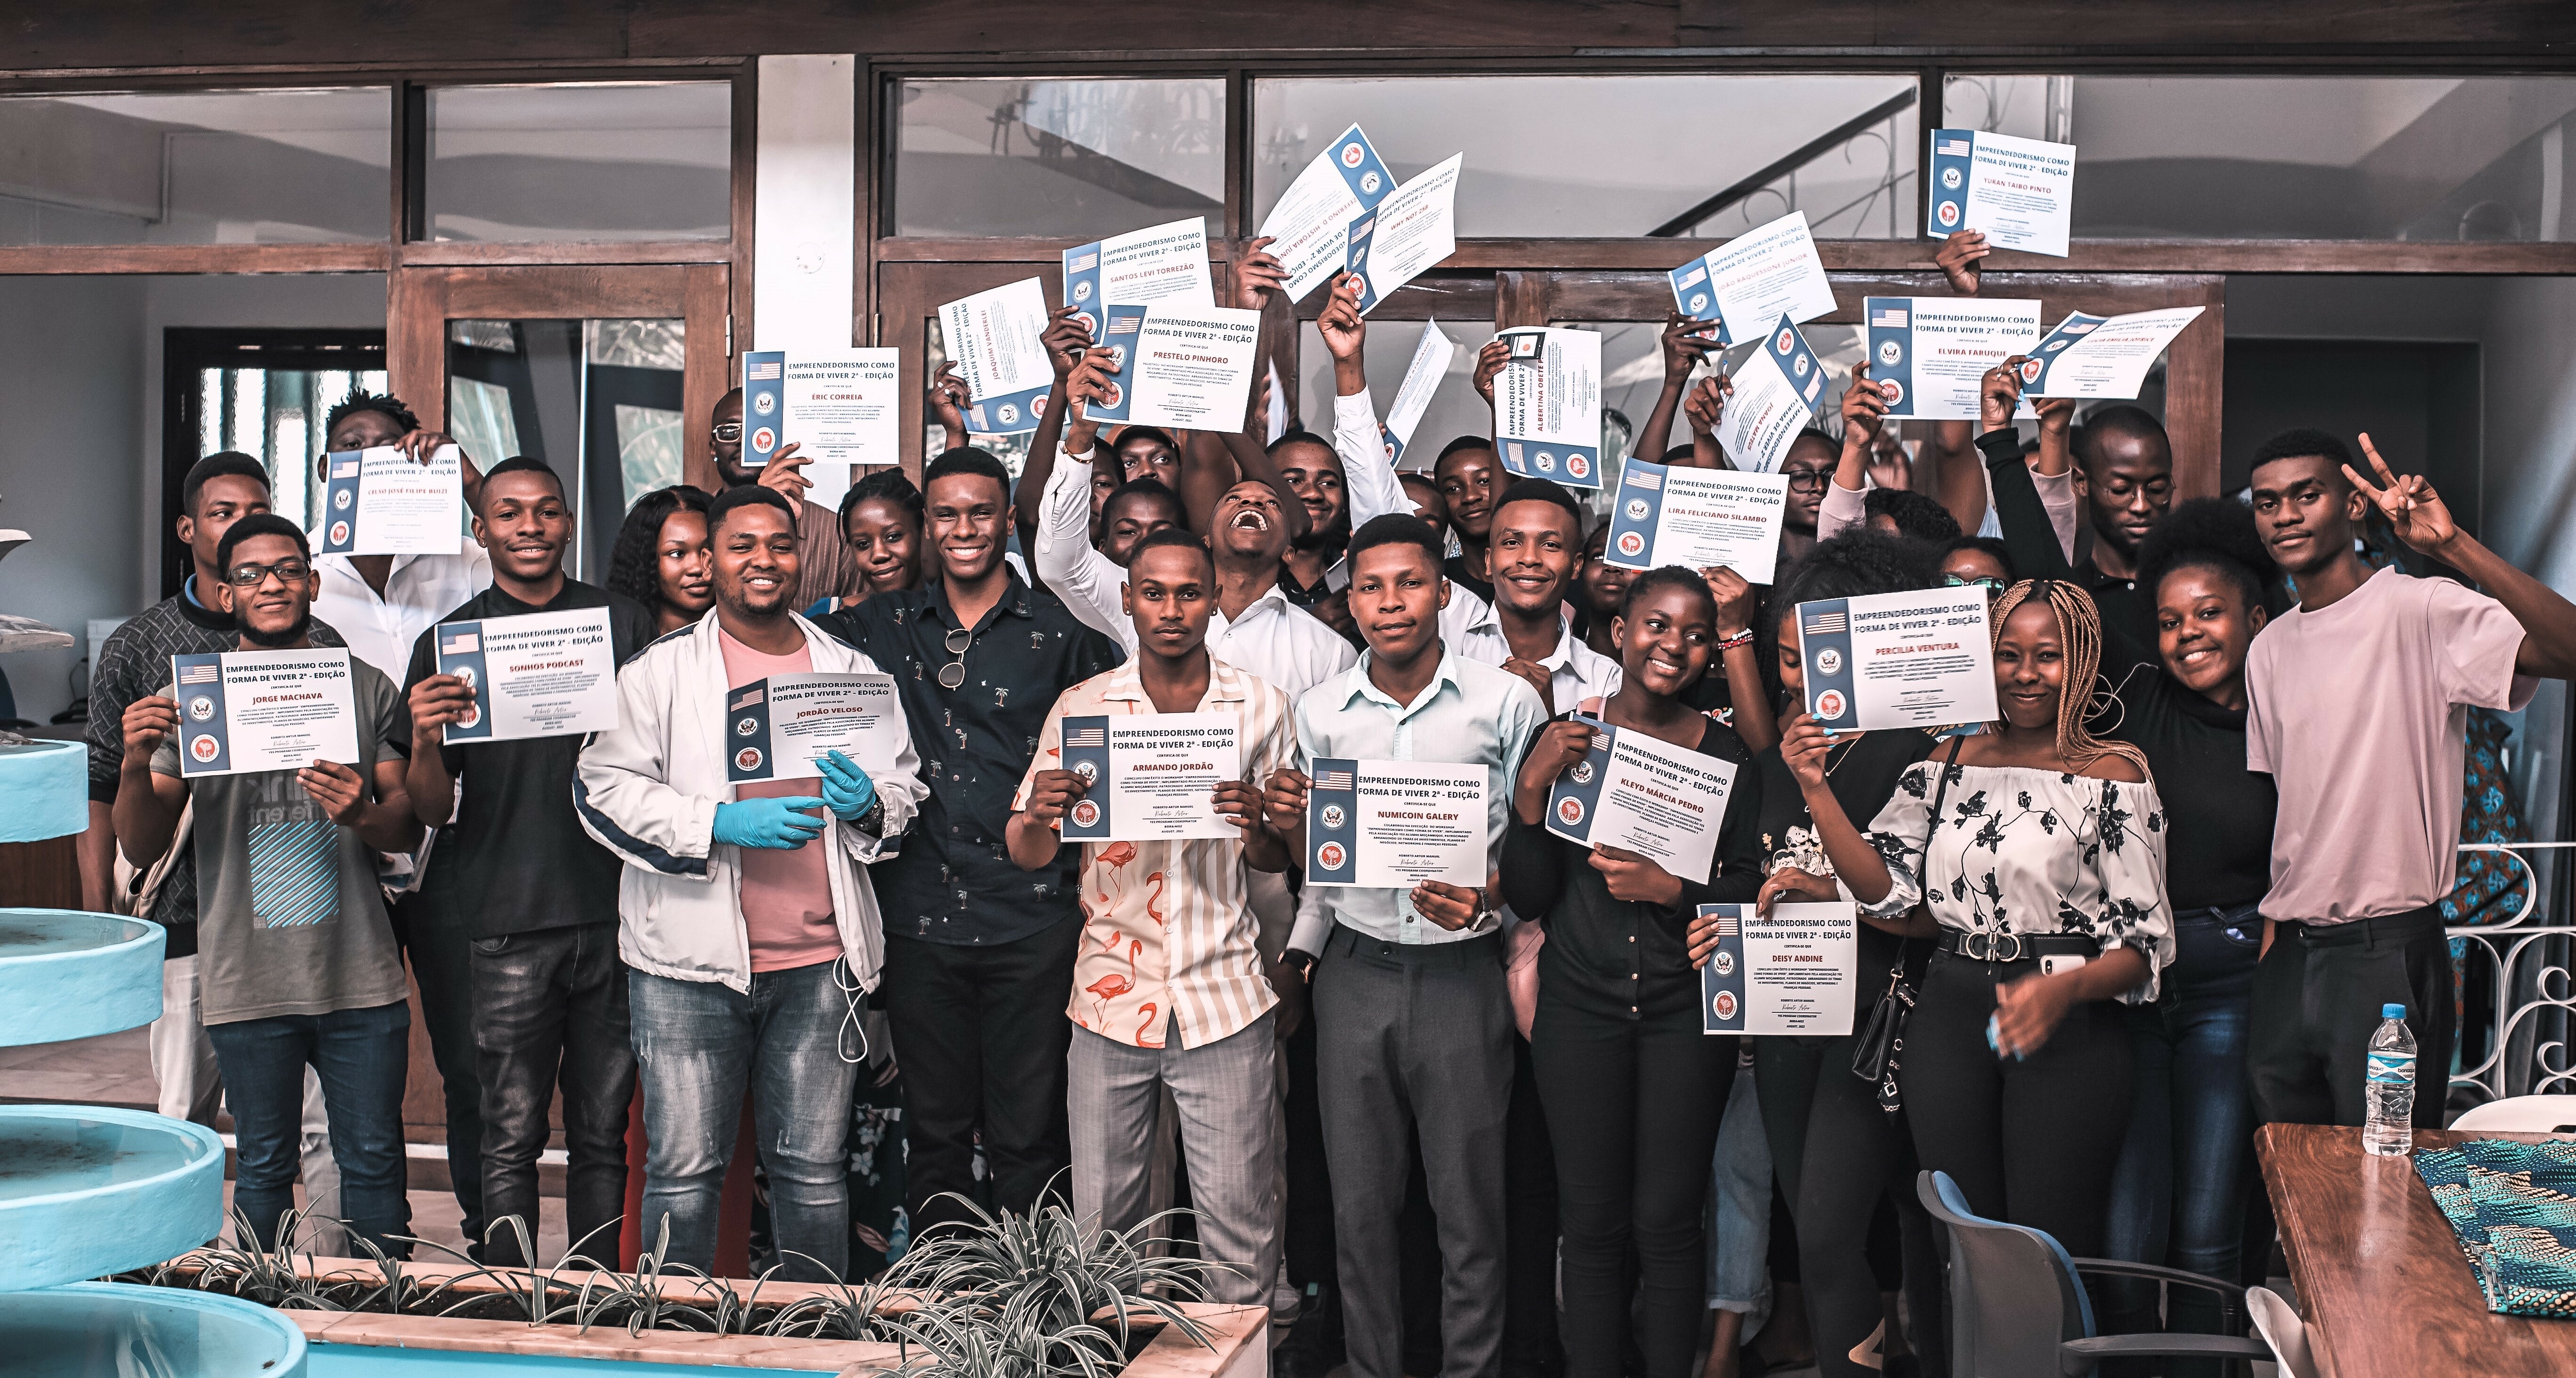 Group photo with certificates